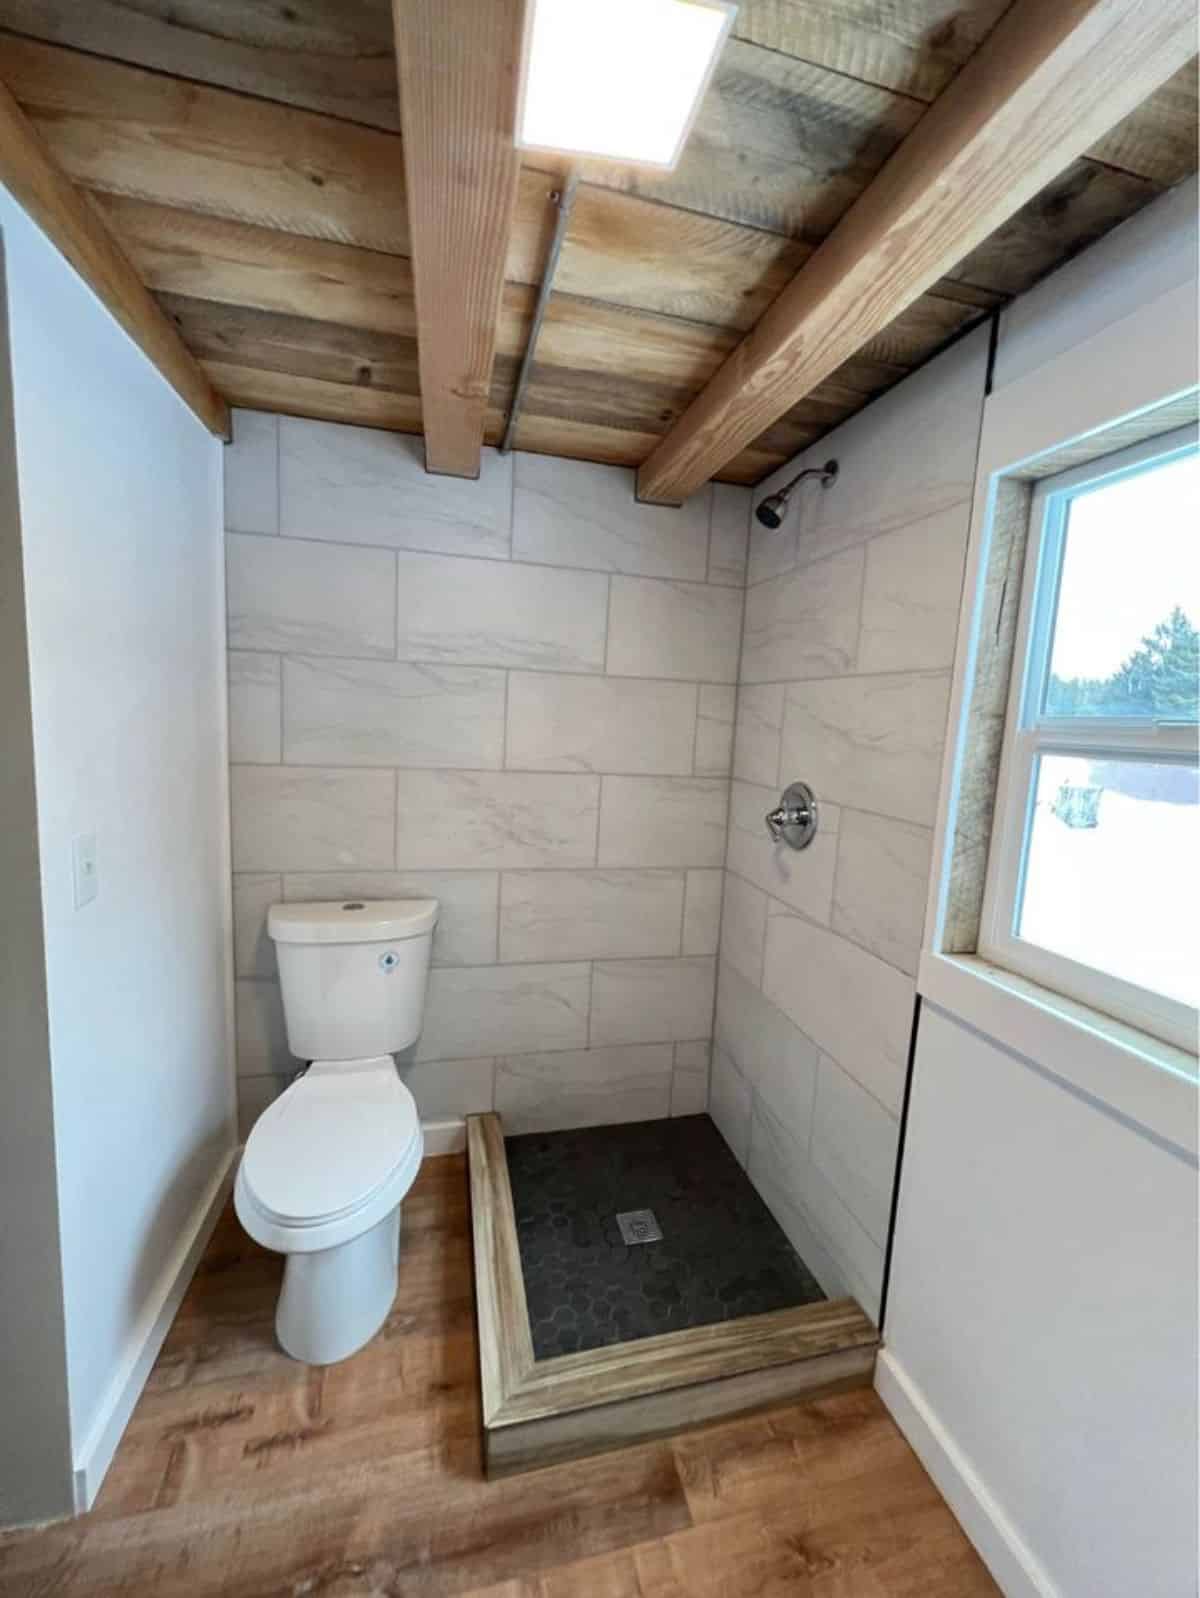 standard toilet, shower area all placed systematically in the bathroom of rustic mini home